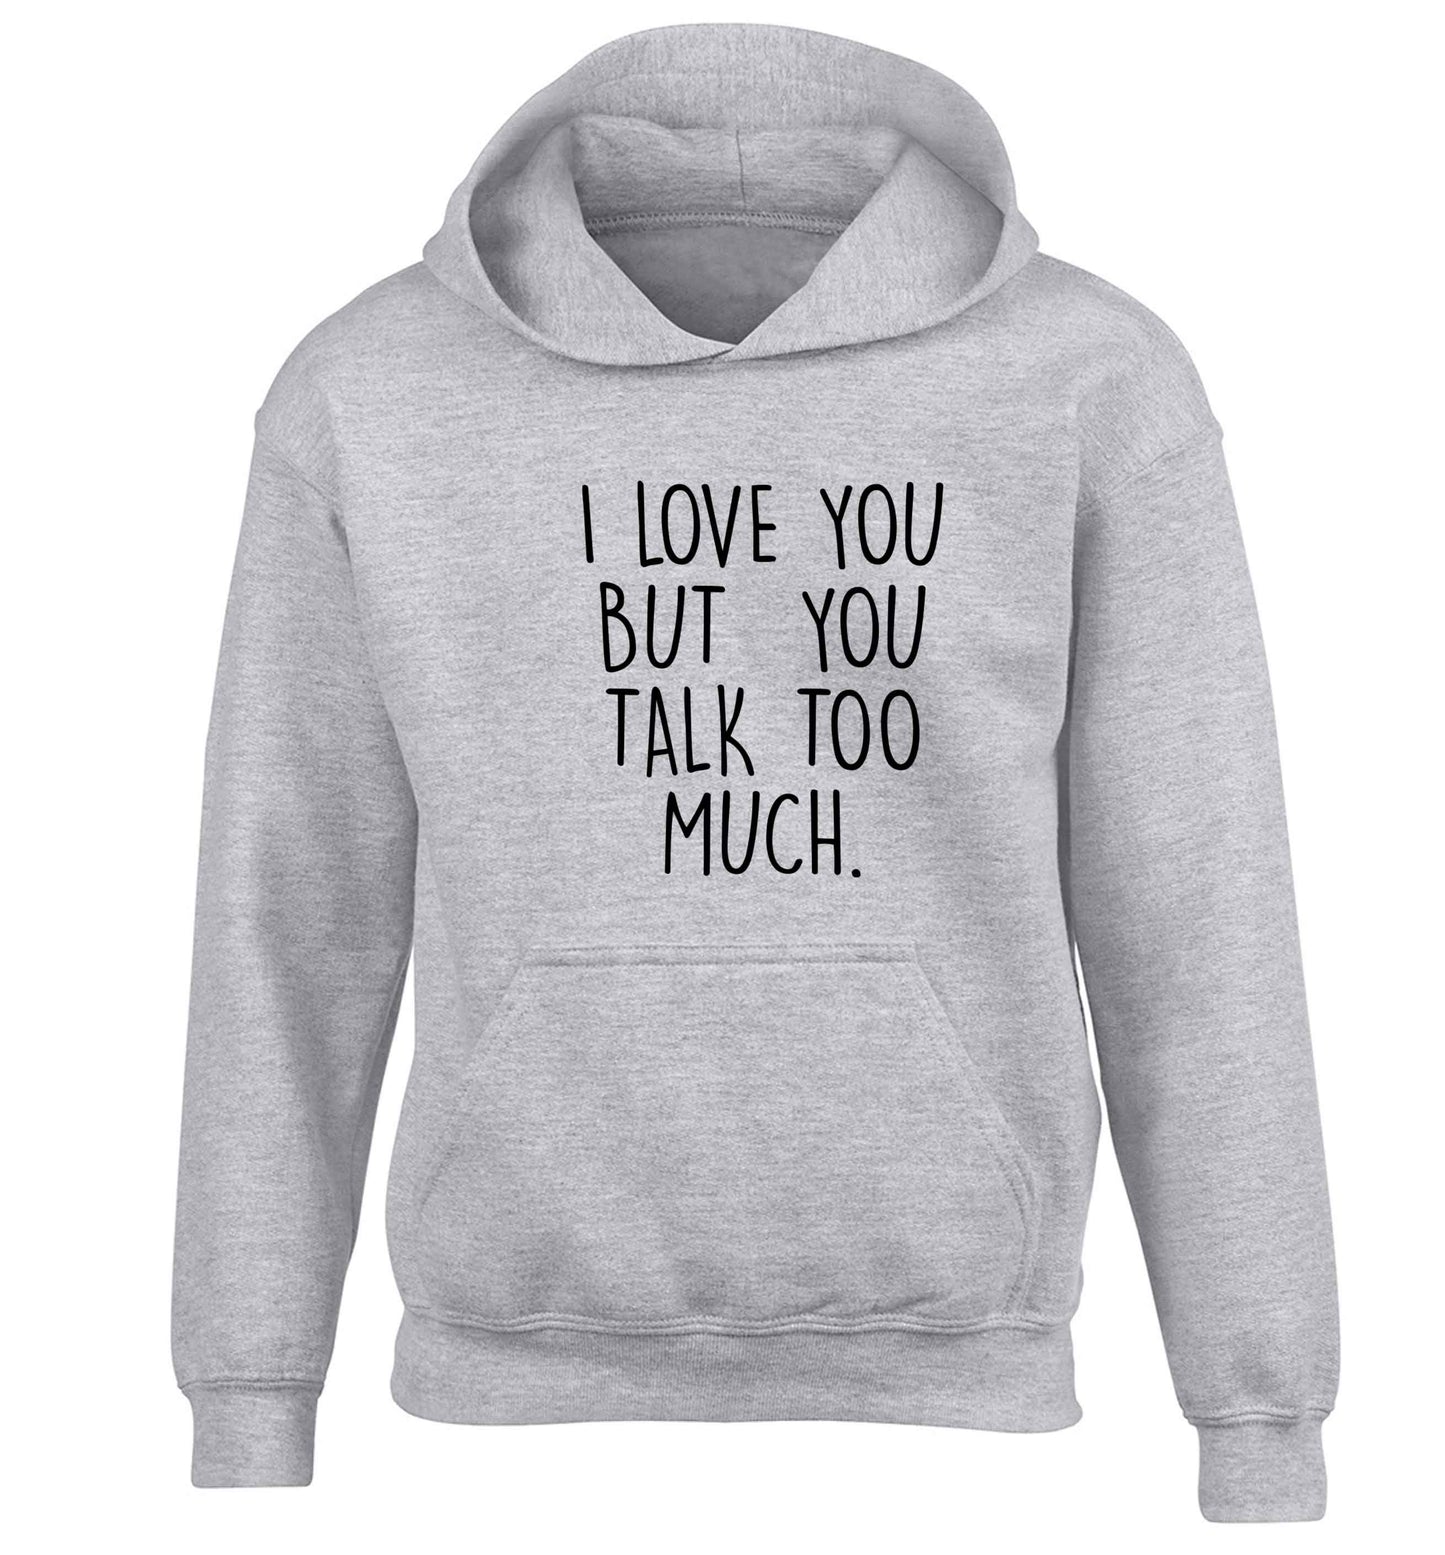 I love you but you talk too much children's grey hoodie 12-13 Years